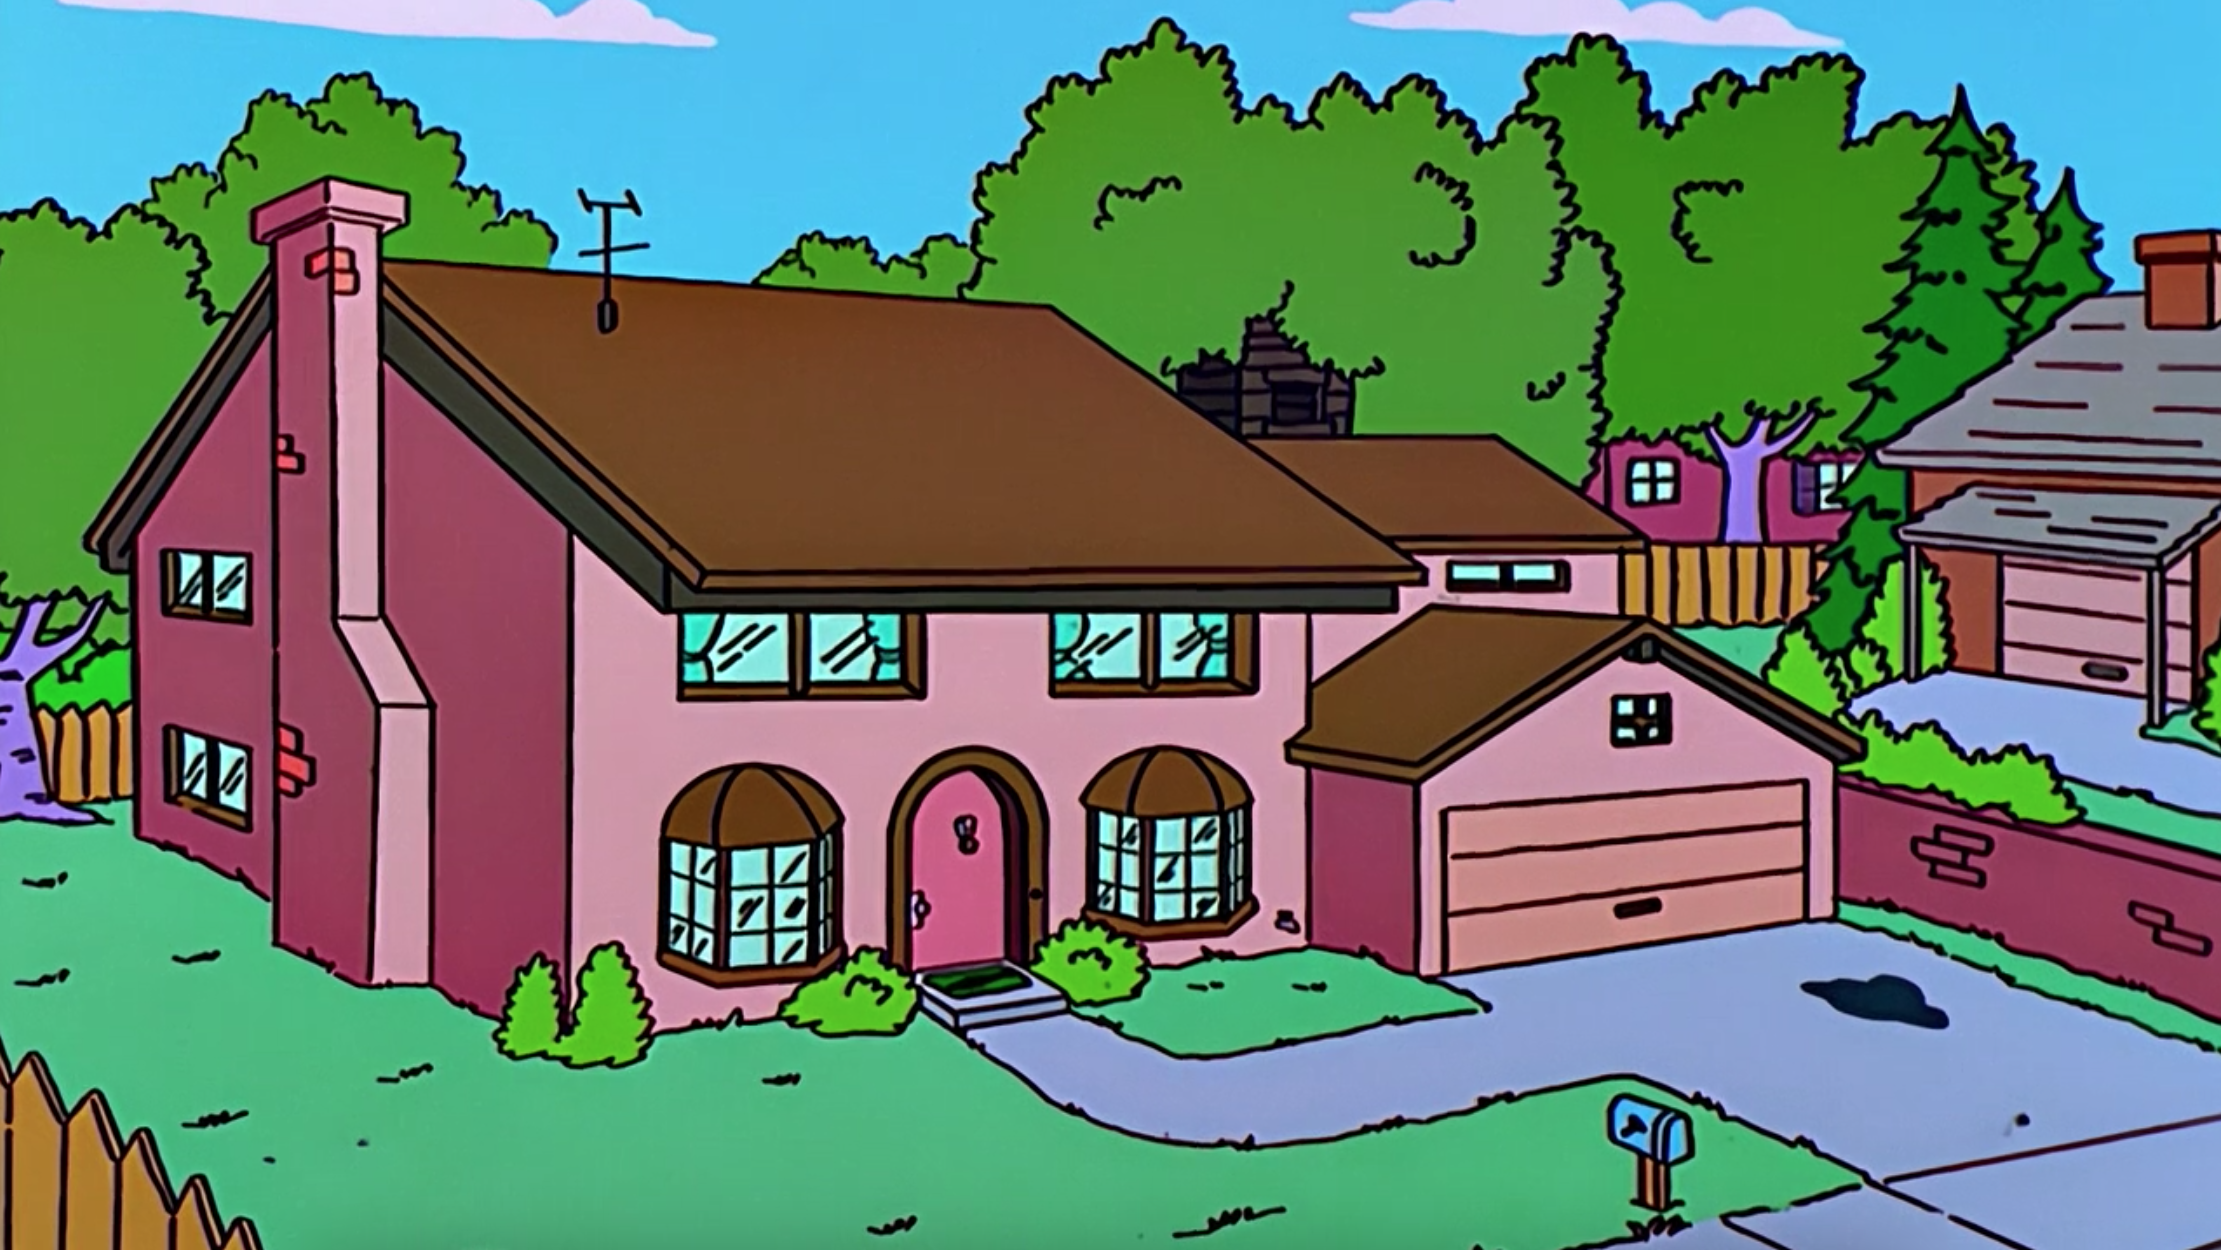 Today’s real estate market pins The Simpsons house at $450,000